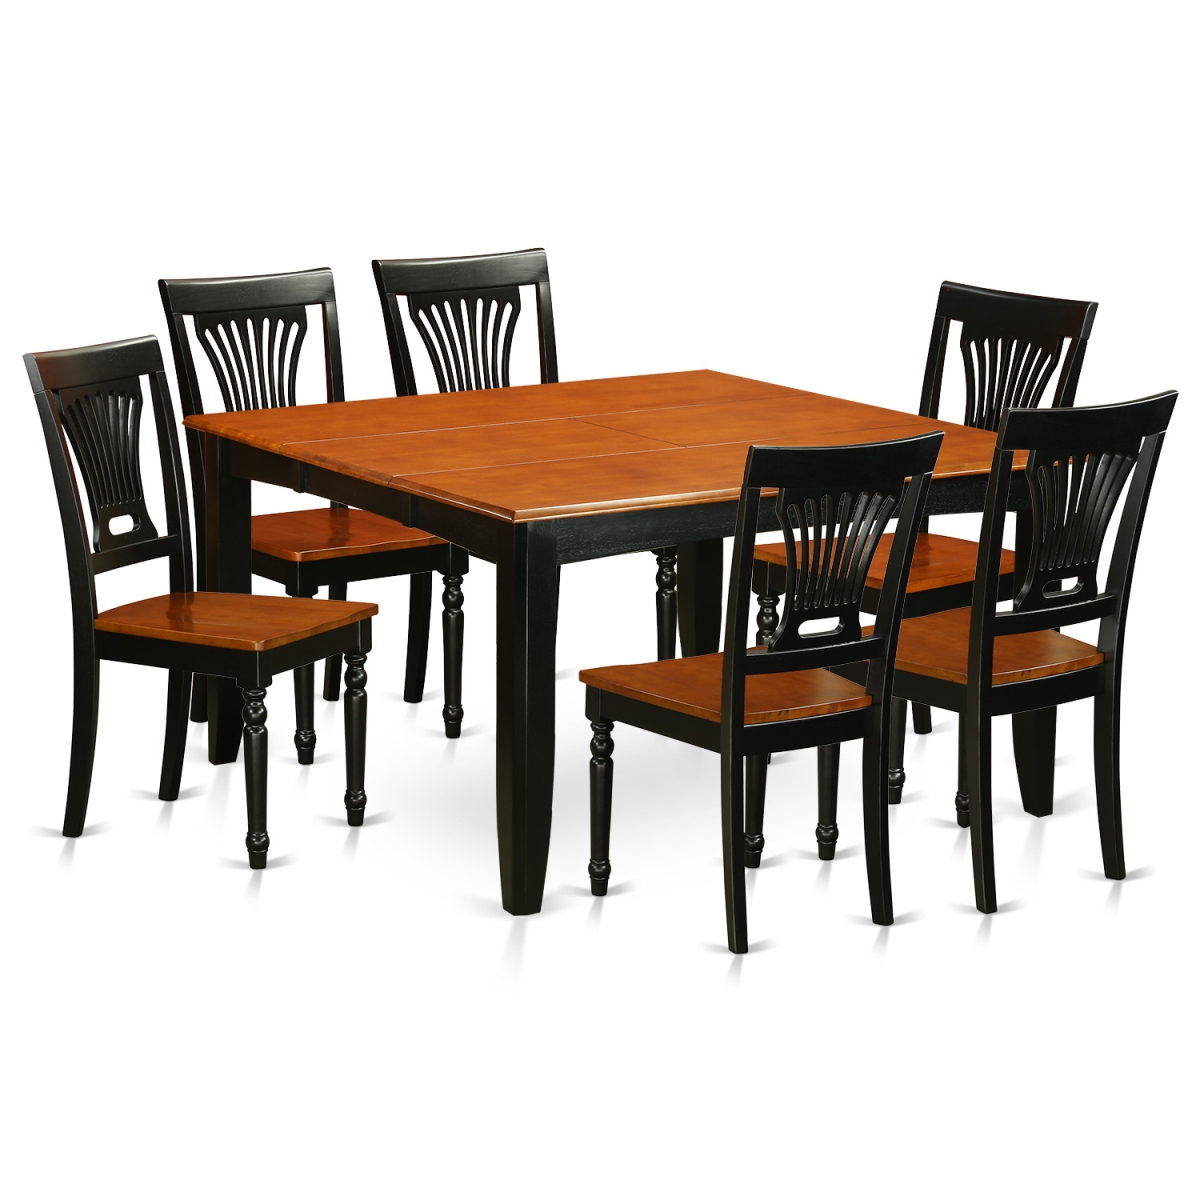 PFPL7-BCH-W Wood Seat Dining Room Set - Table & 6 Chairs, Black & Cherry - 7 Piece -  East West Furniture